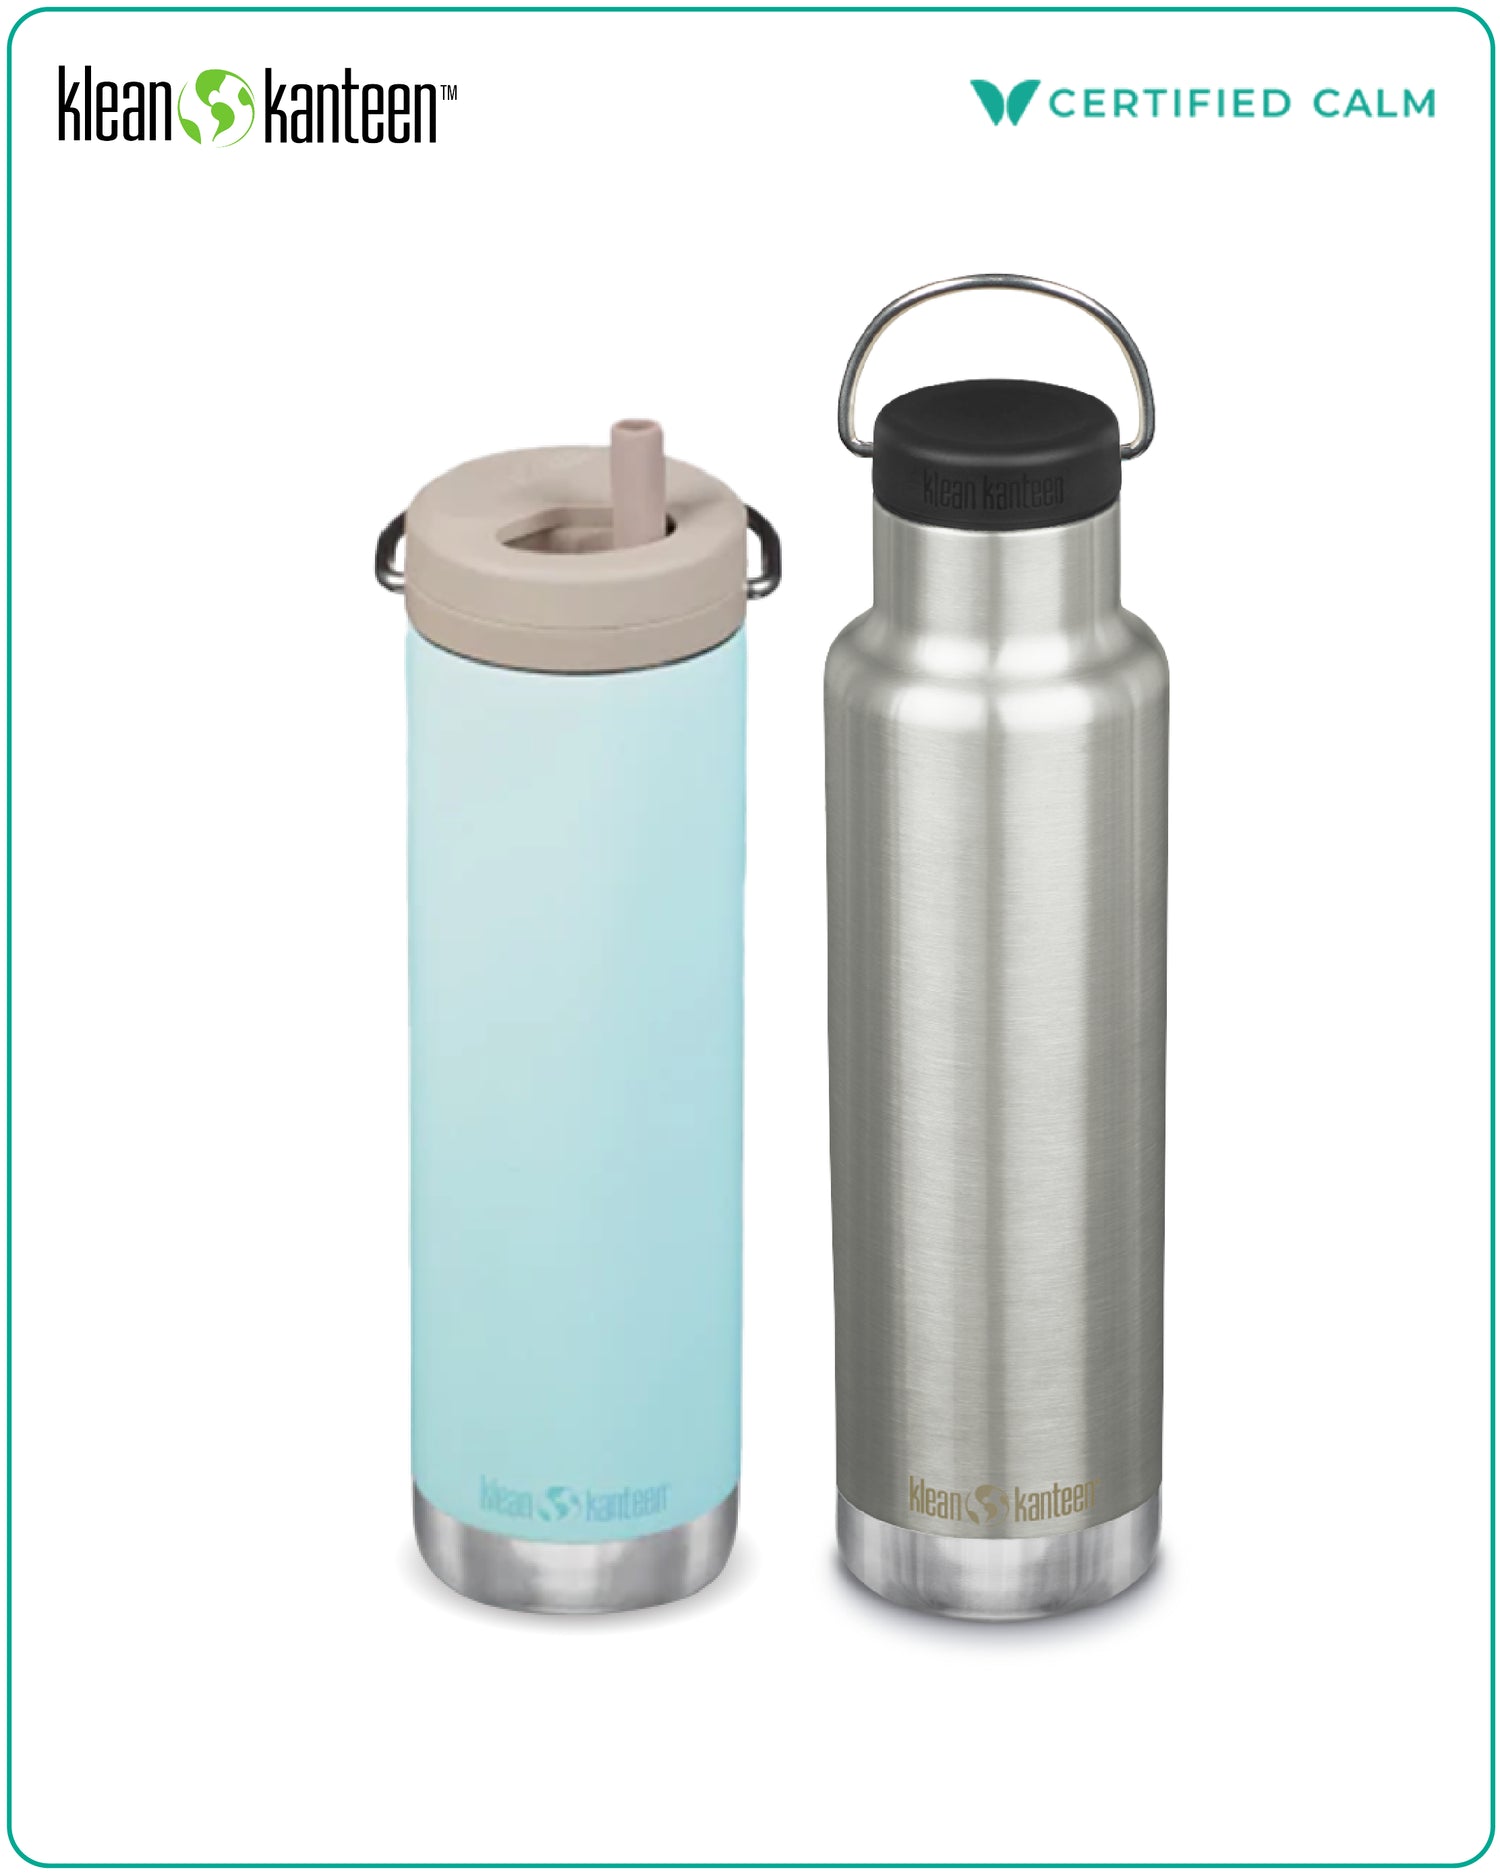 Klean Kanteen 20oz TKWide Blue Tint (w/ Twist Cap) and 20oz Classic Narrow Insulated Brushed Stainless Bundle